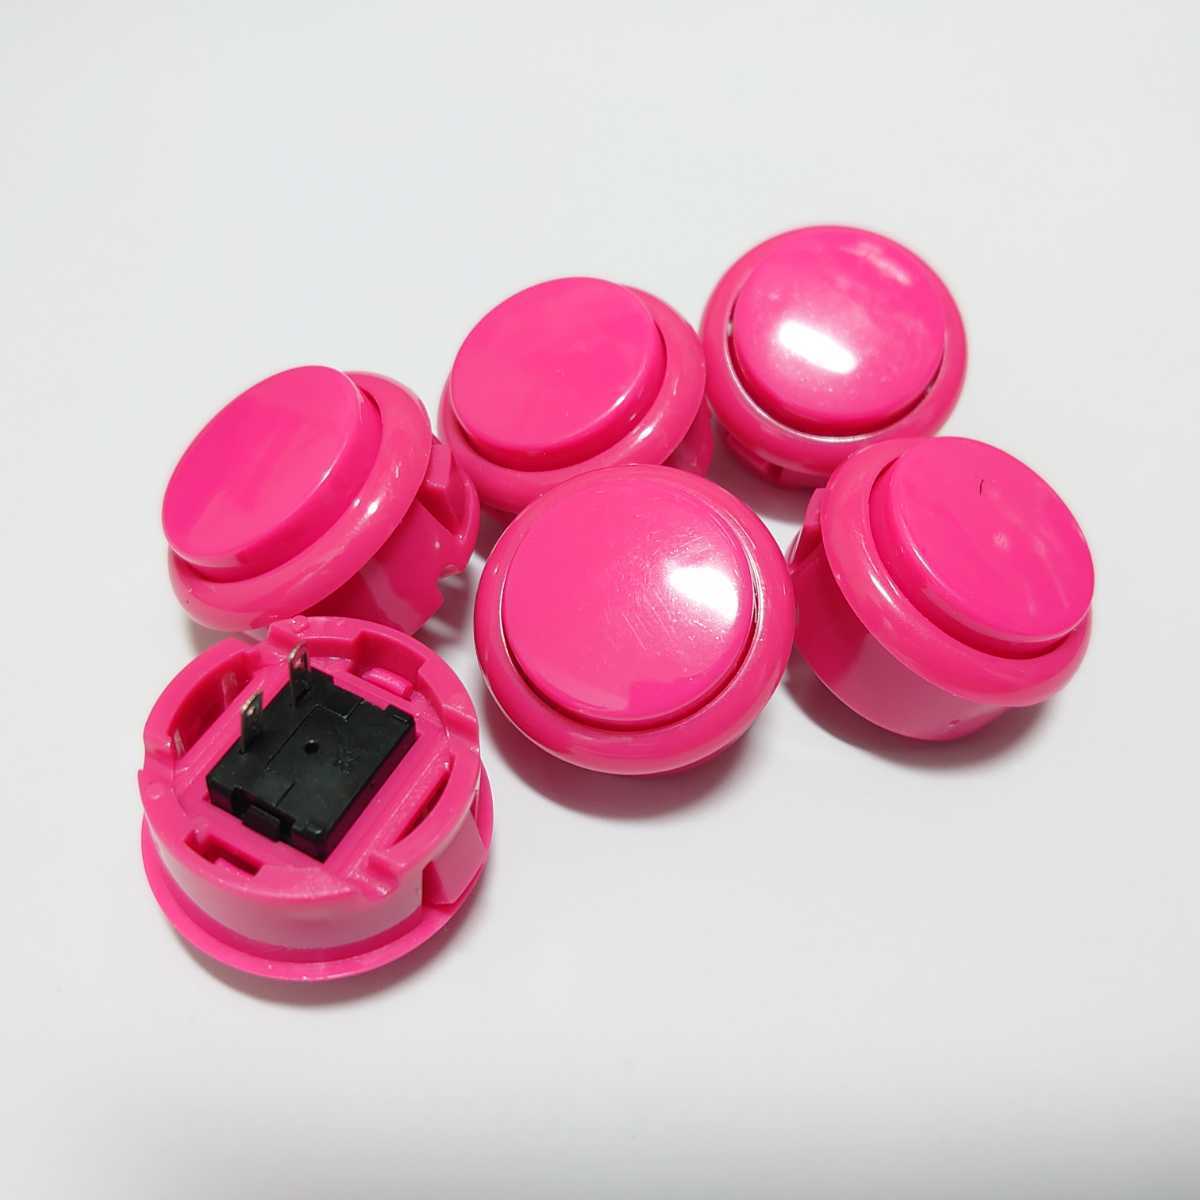 6 piece pink color pushed . button 30mm 30Φ controller ake navy blue. original work . push button arcade game case navy blue panel for Sanwa electron interchangeable peach color 